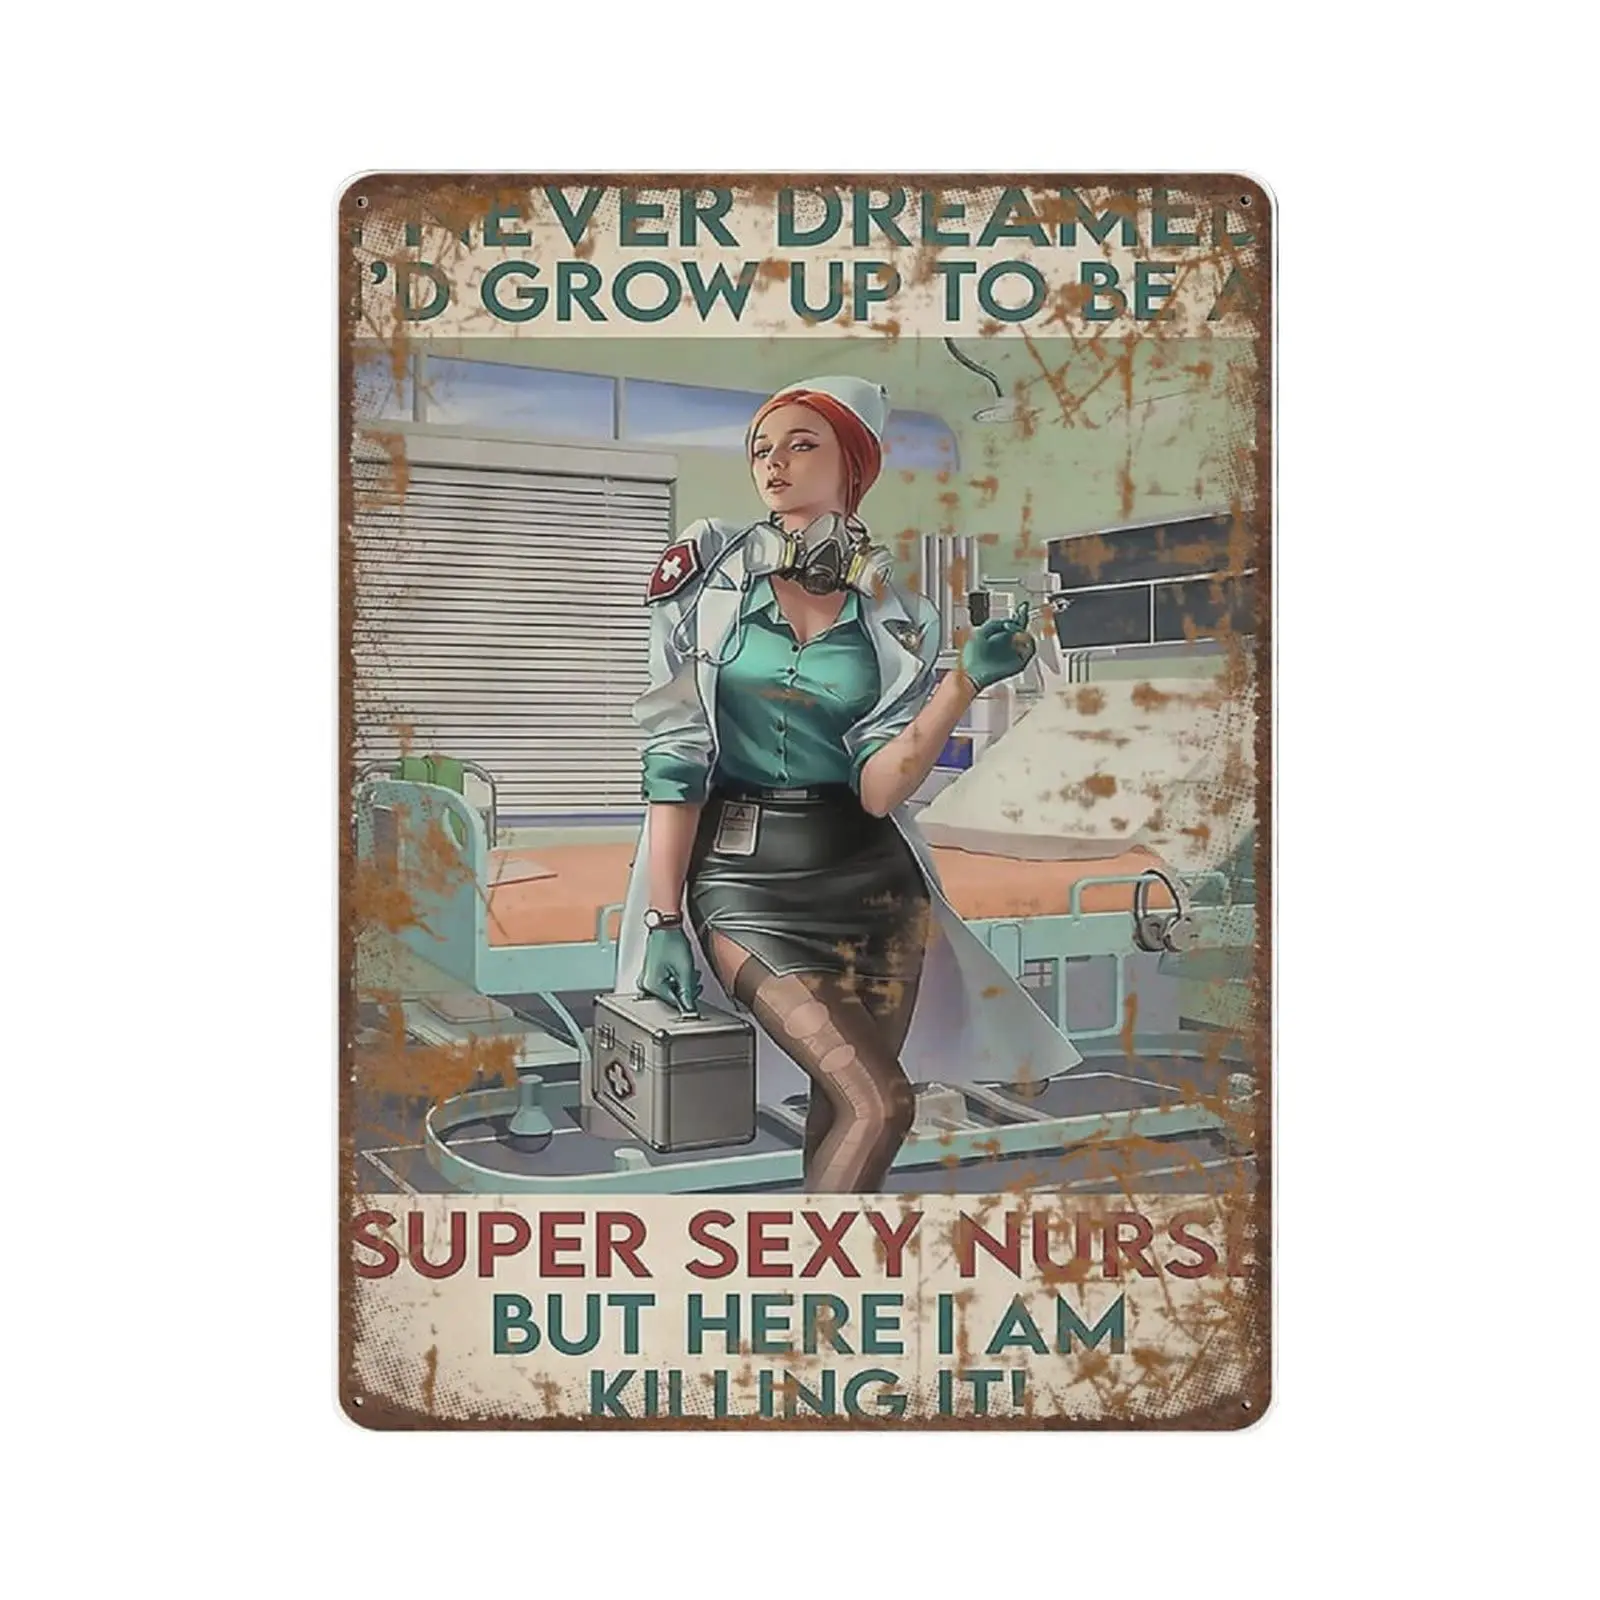 

Antique Durable Thick Metal Sign,I Never Dreamed I'd Grow Up to Be A Super Sexy Nurse But Here I Am Killing It Sign,Novelty